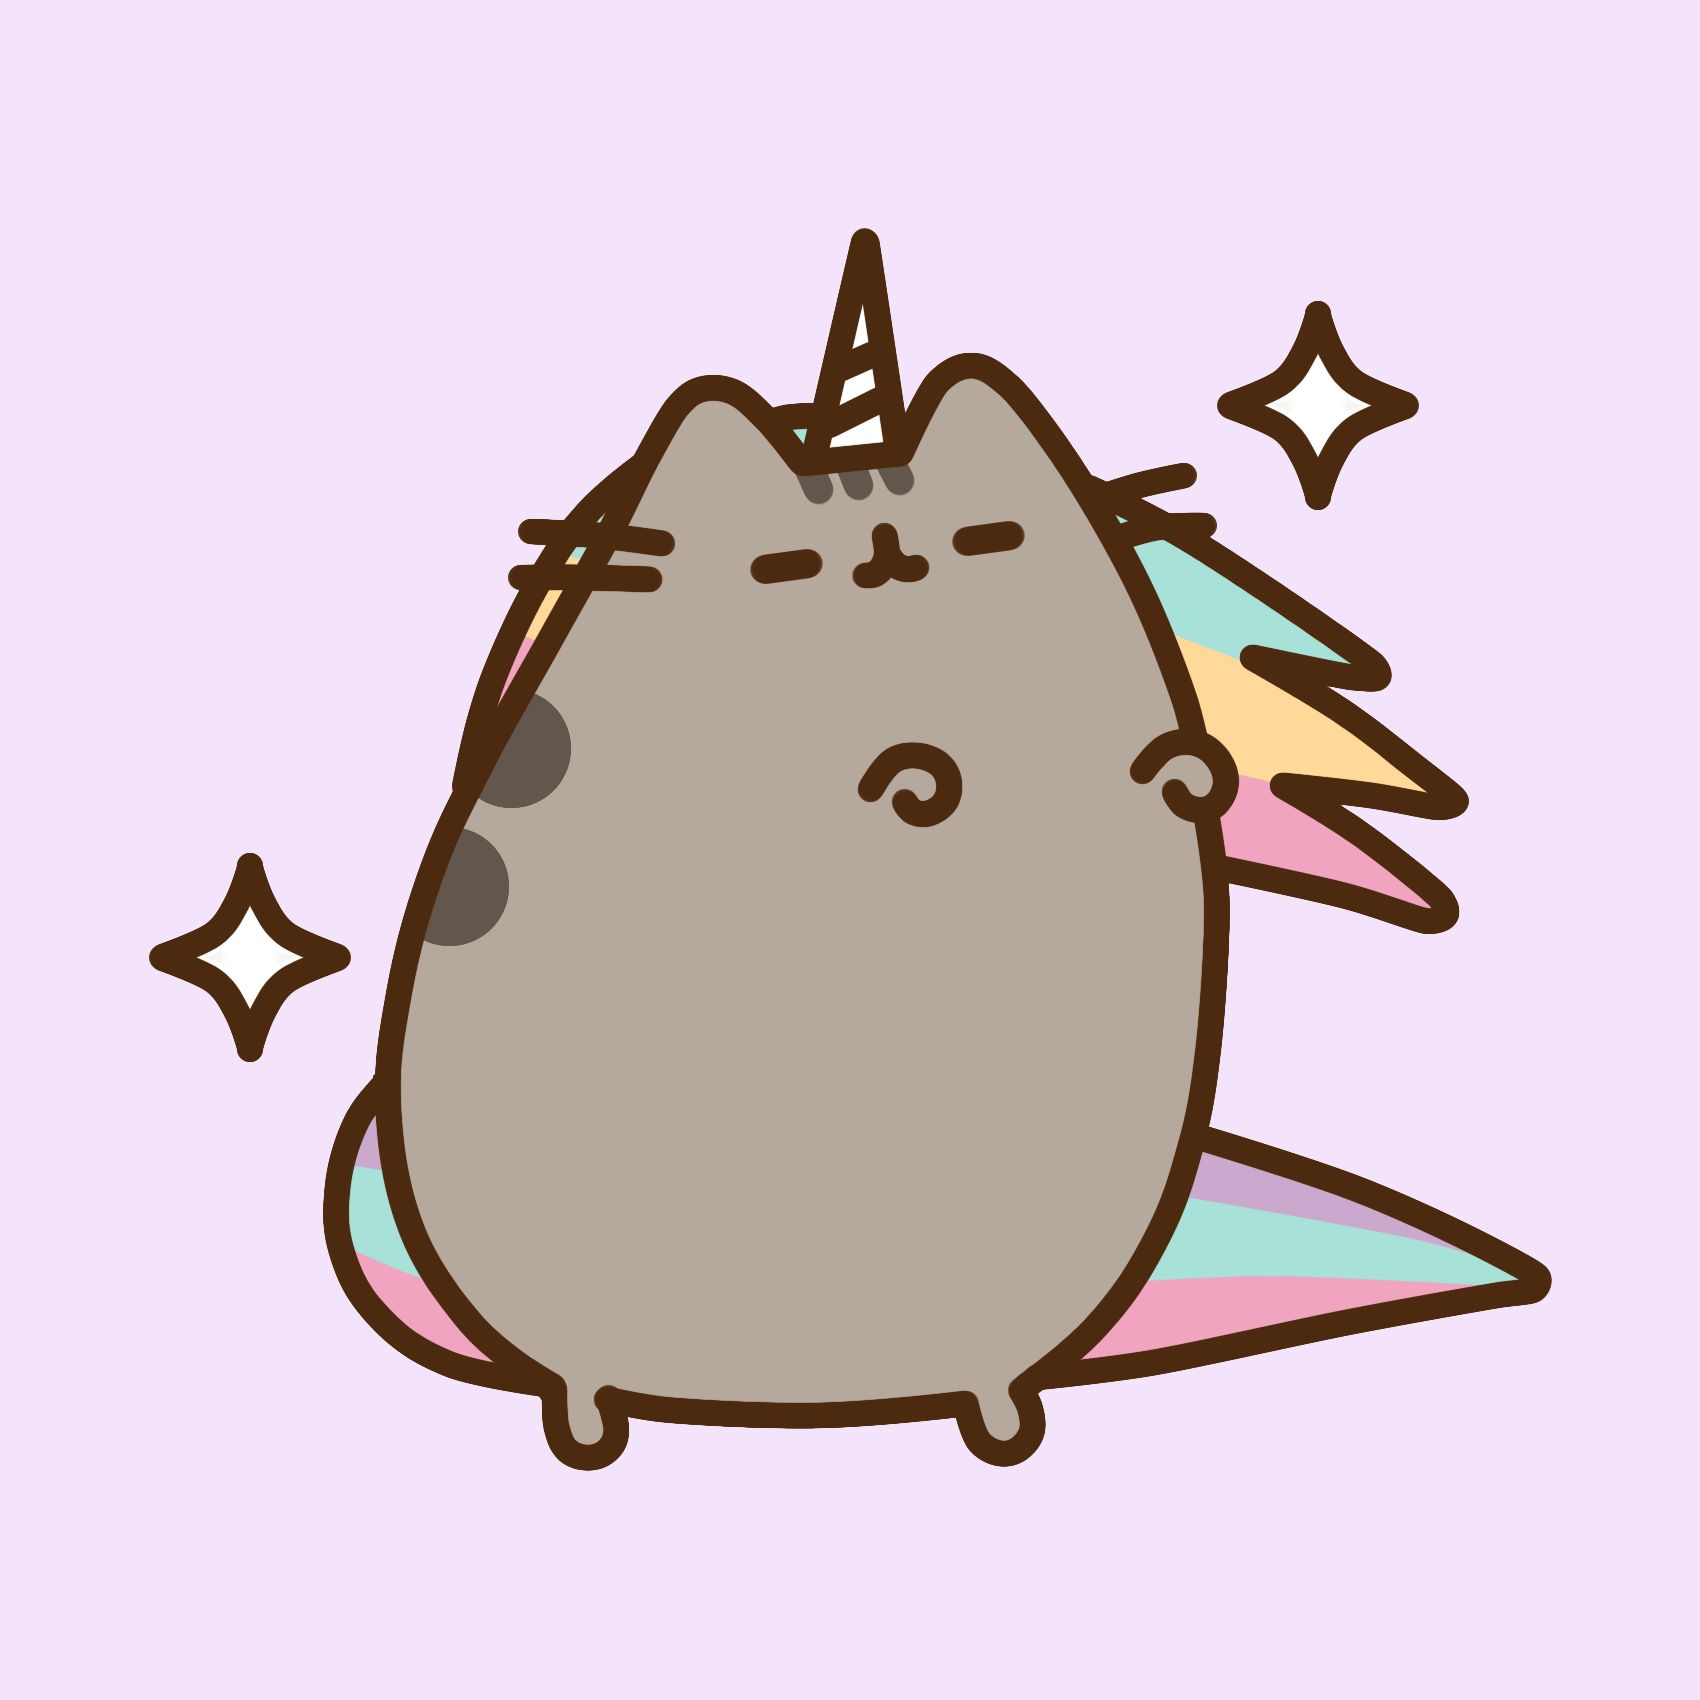 Pusheen the cat on Twitter: "What kind of Pusheen are you? 🦄🦖🐲 Take our